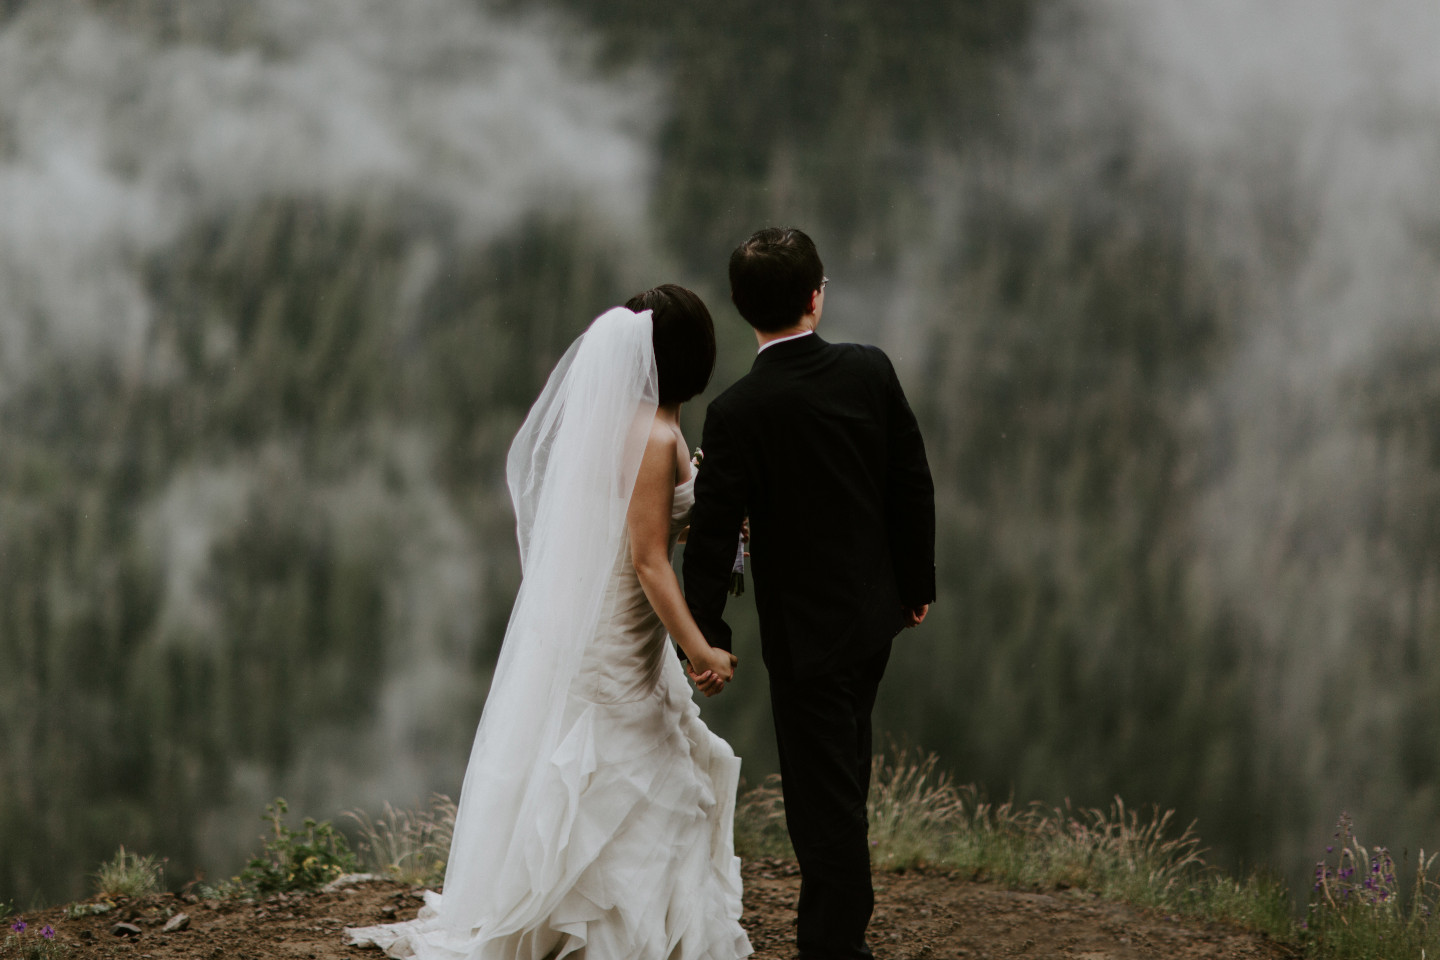 Alex and Valerie watch the clouds part near Mount Hood. Elopement wedding photography at Mount Hood by Sienna Plus Josh.